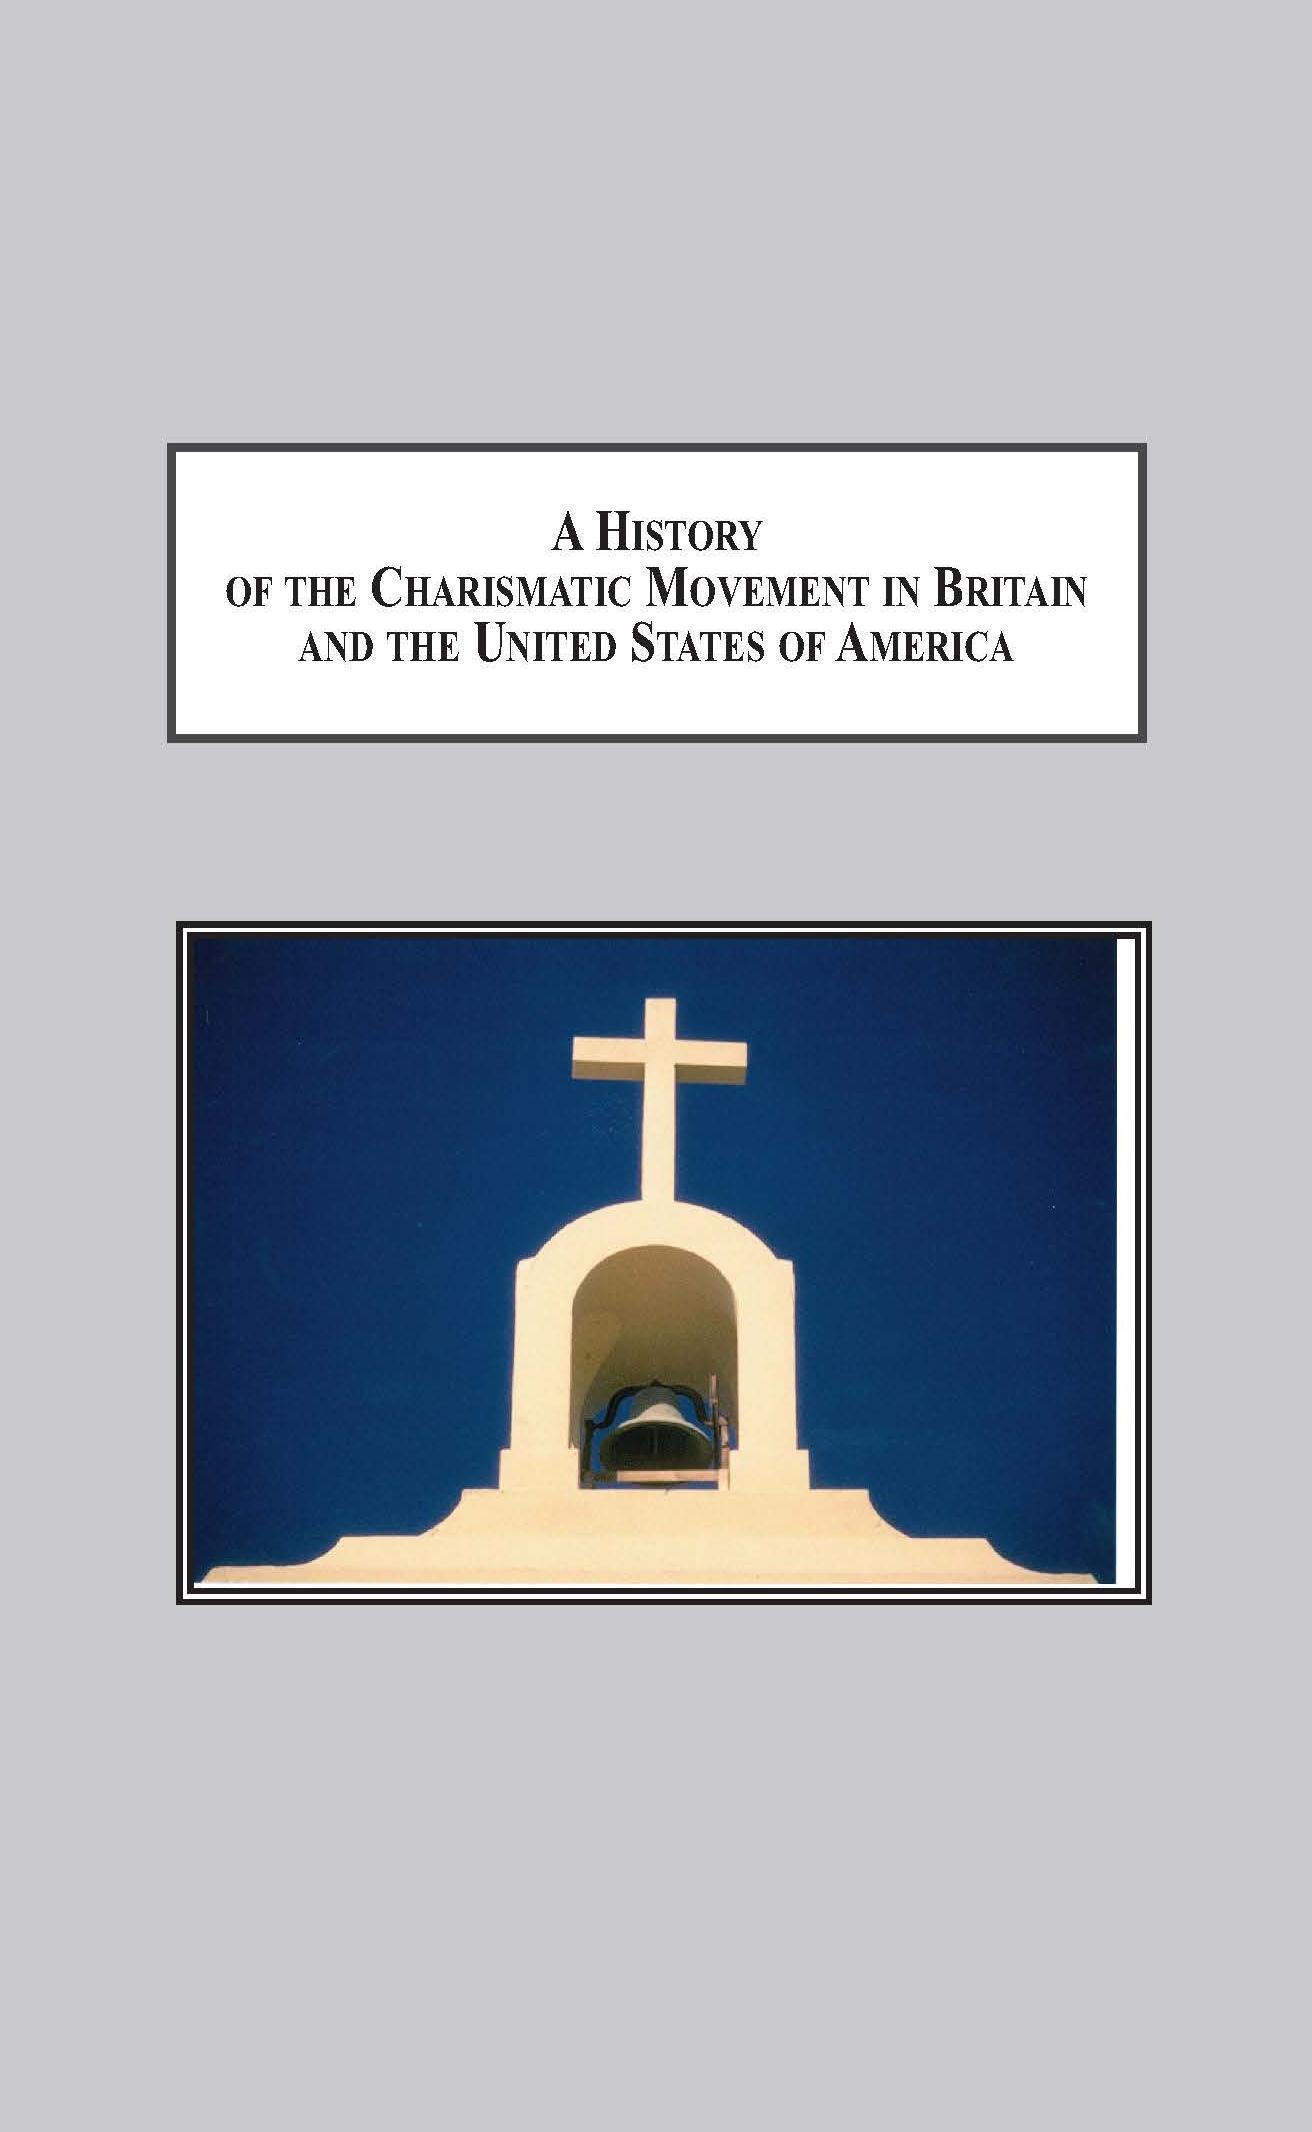 A History of the Charismatic Movement in Britain and the United States of America